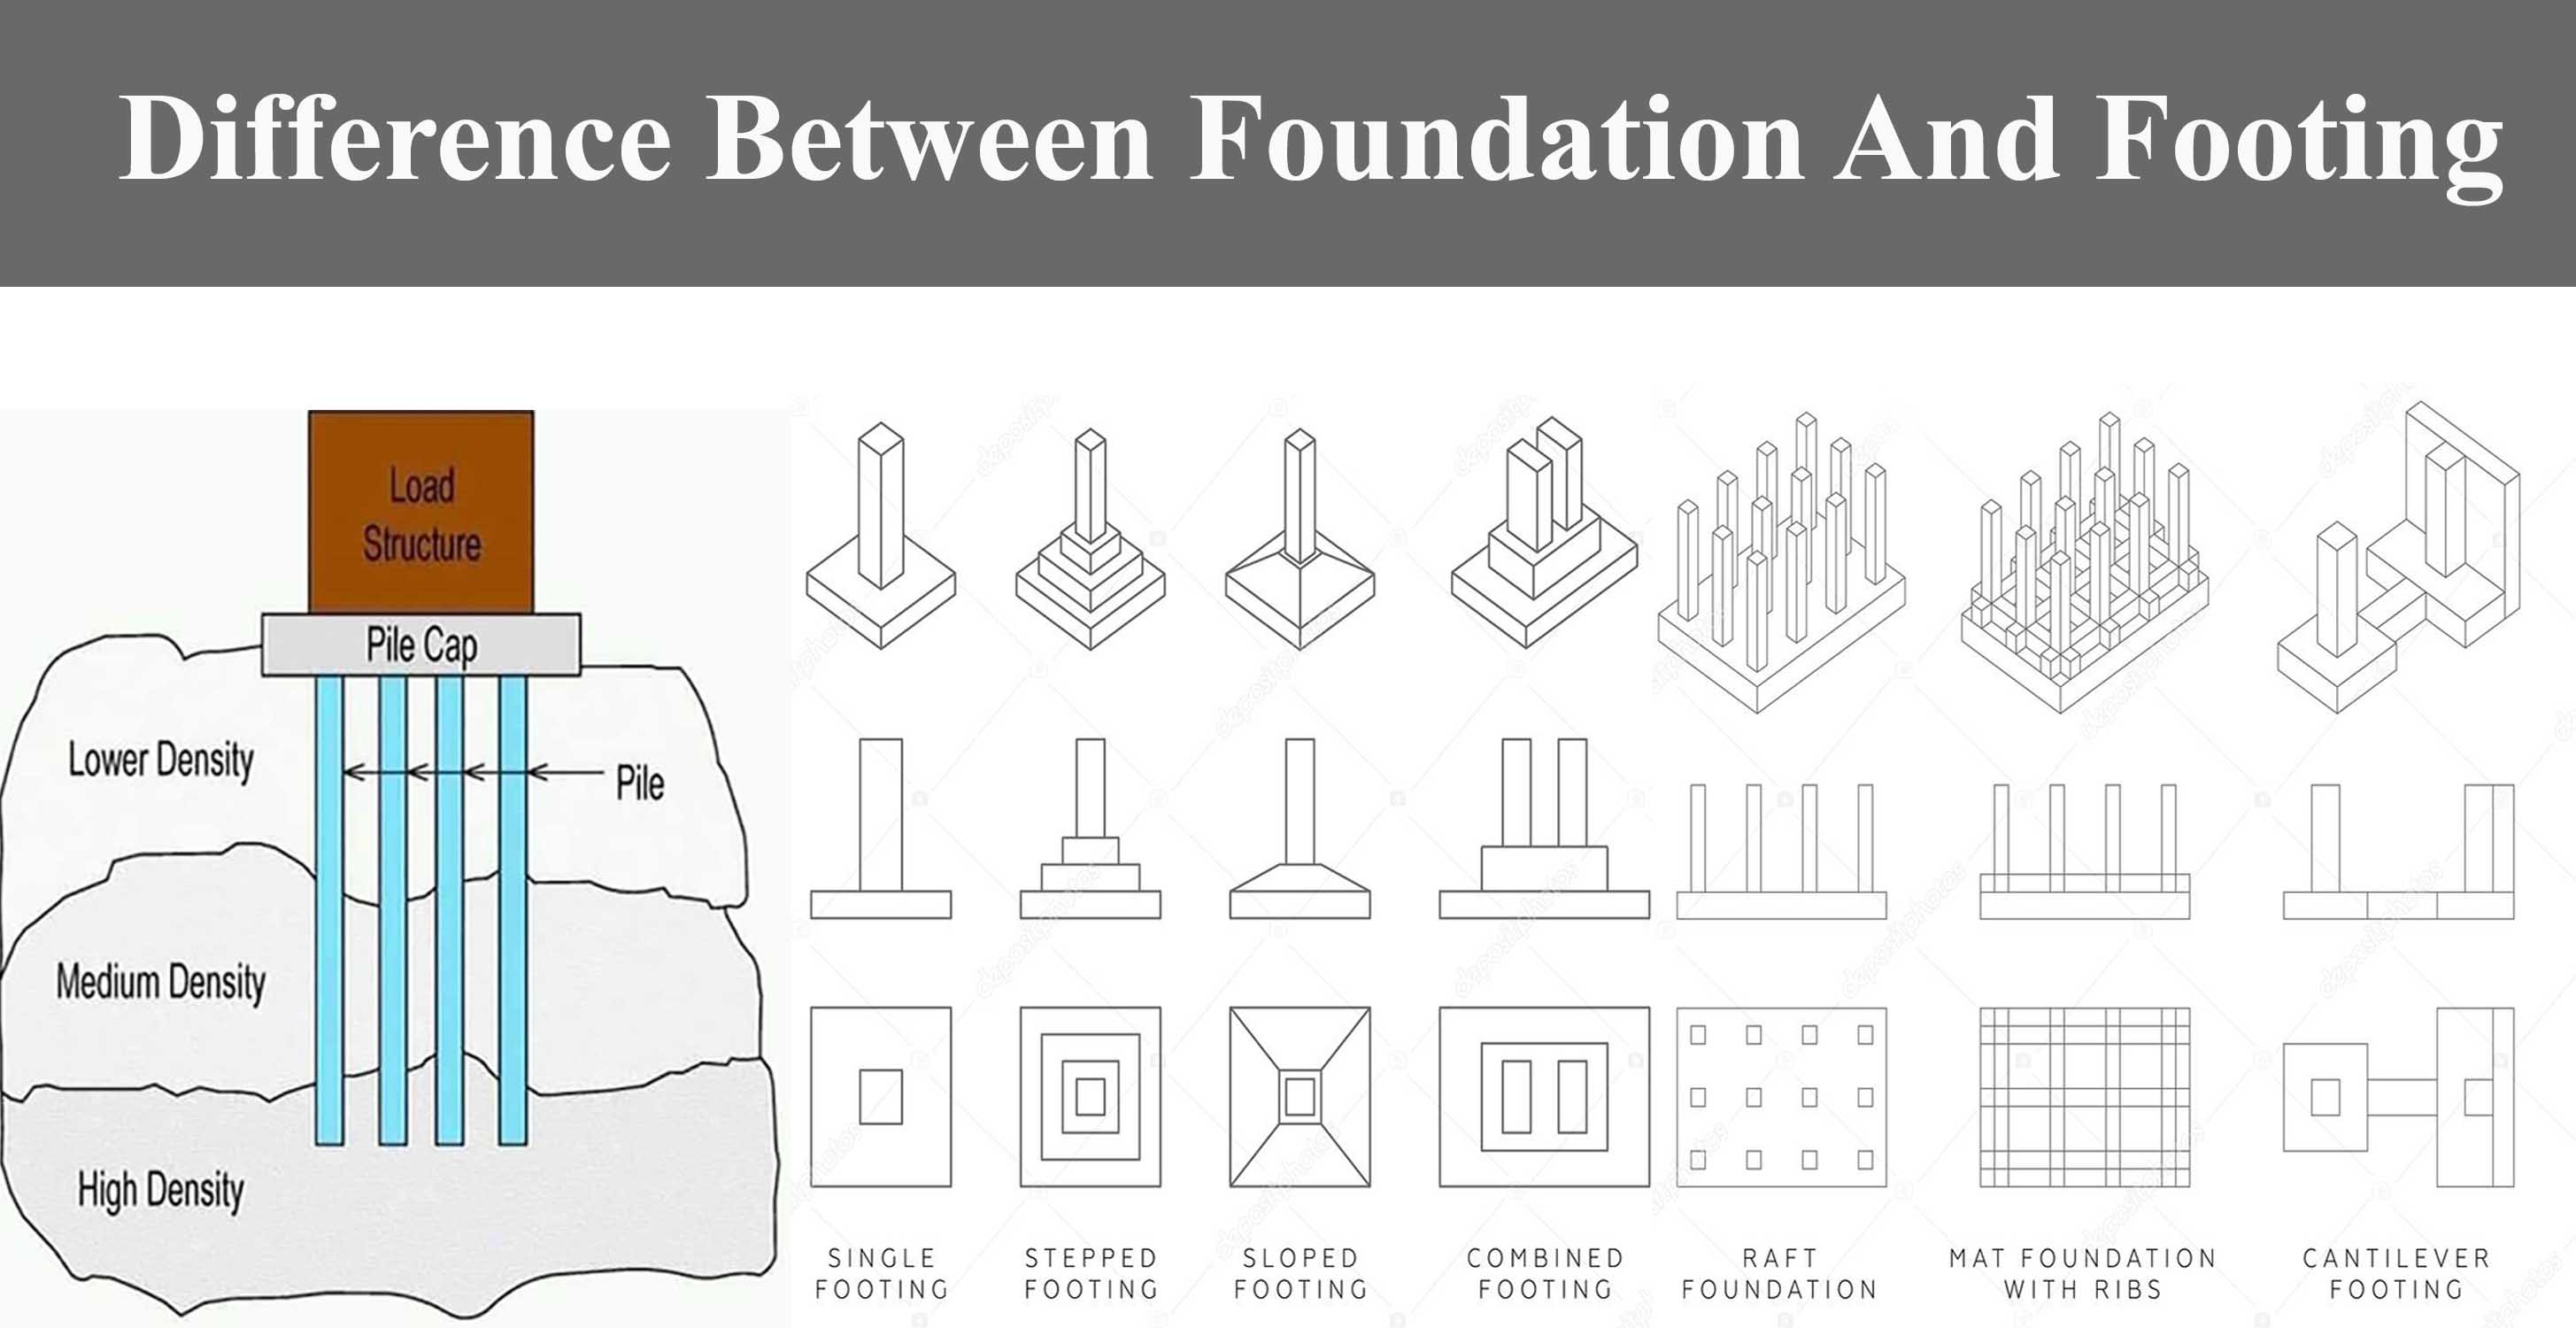 Sound footing. Footing Foundation. Structures of pile Foundation. Foundation principles. Foundation mat Type.